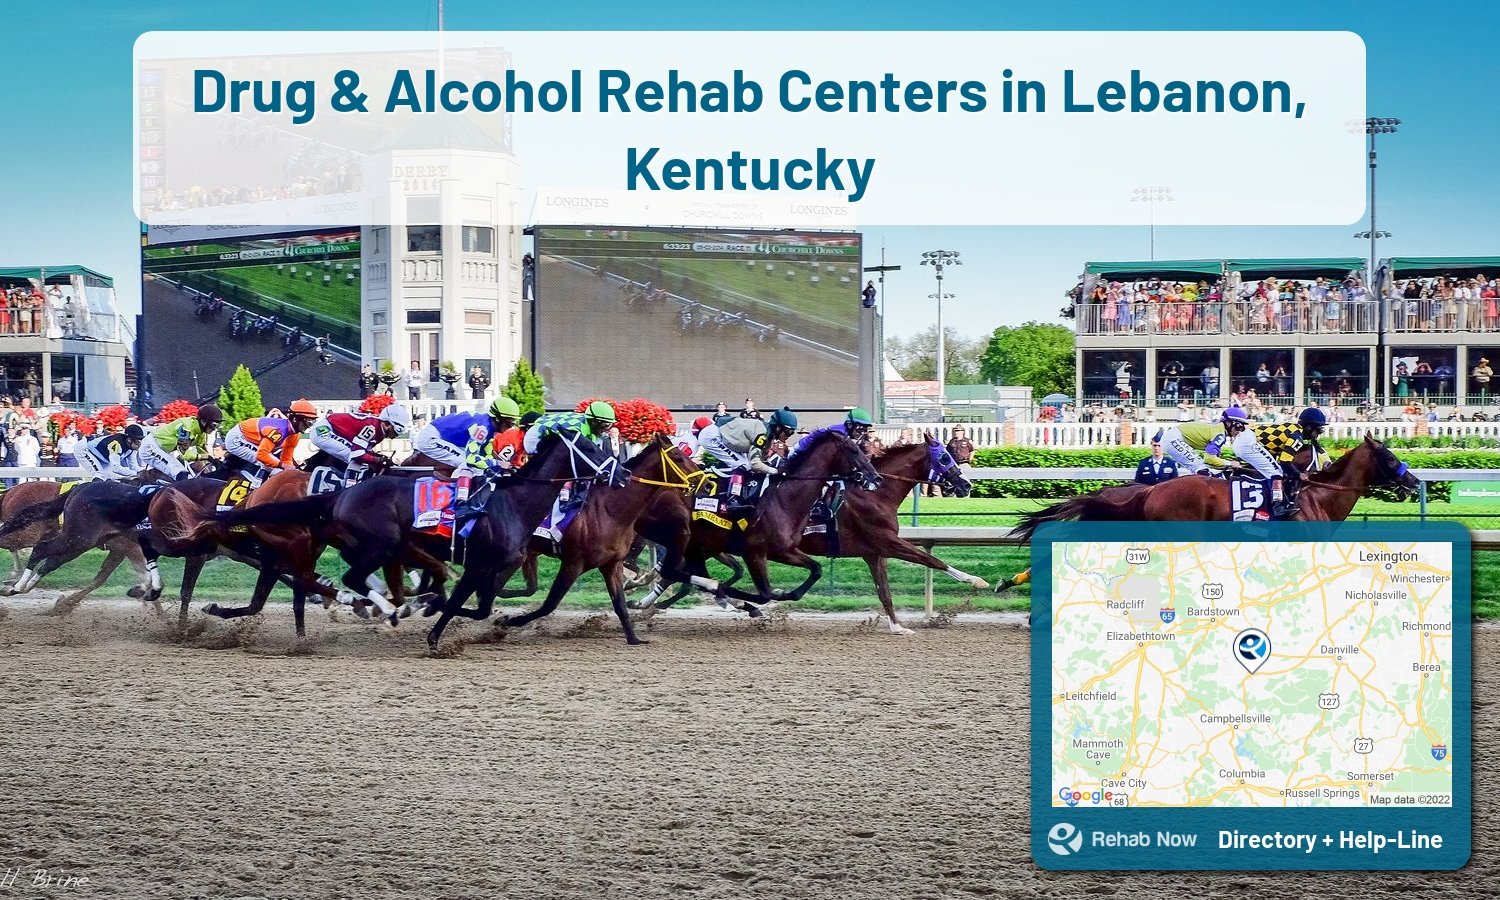 View options, availability, treatment methods, and more, for drug rehab and alcohol treatment in Lebanon, Kentucky